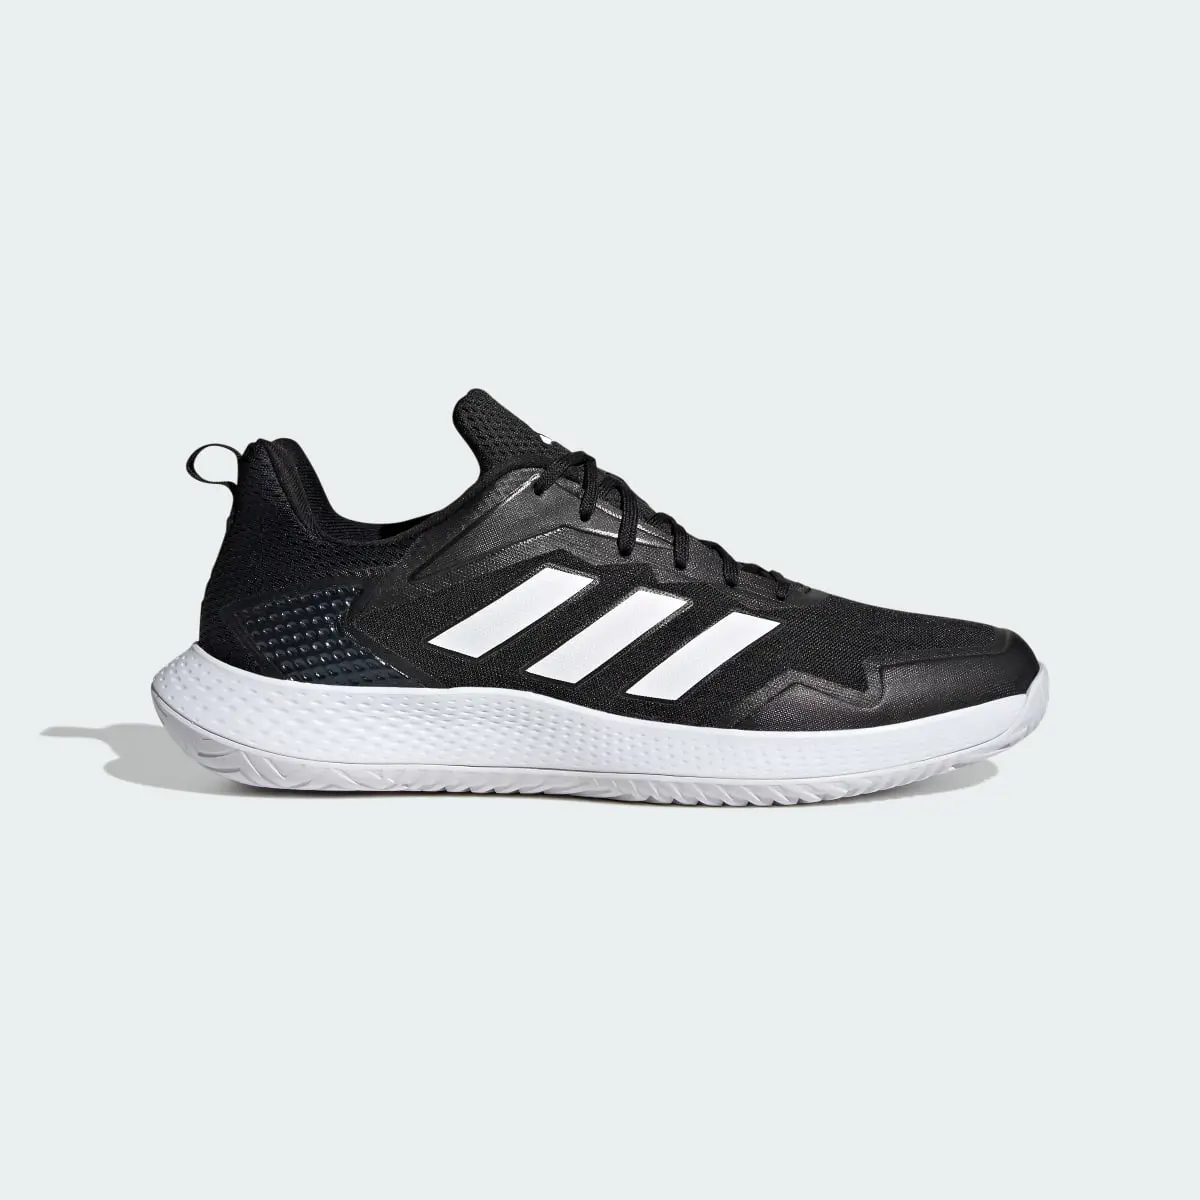 Adidas Defiant Speed Tennis Shoes. 2